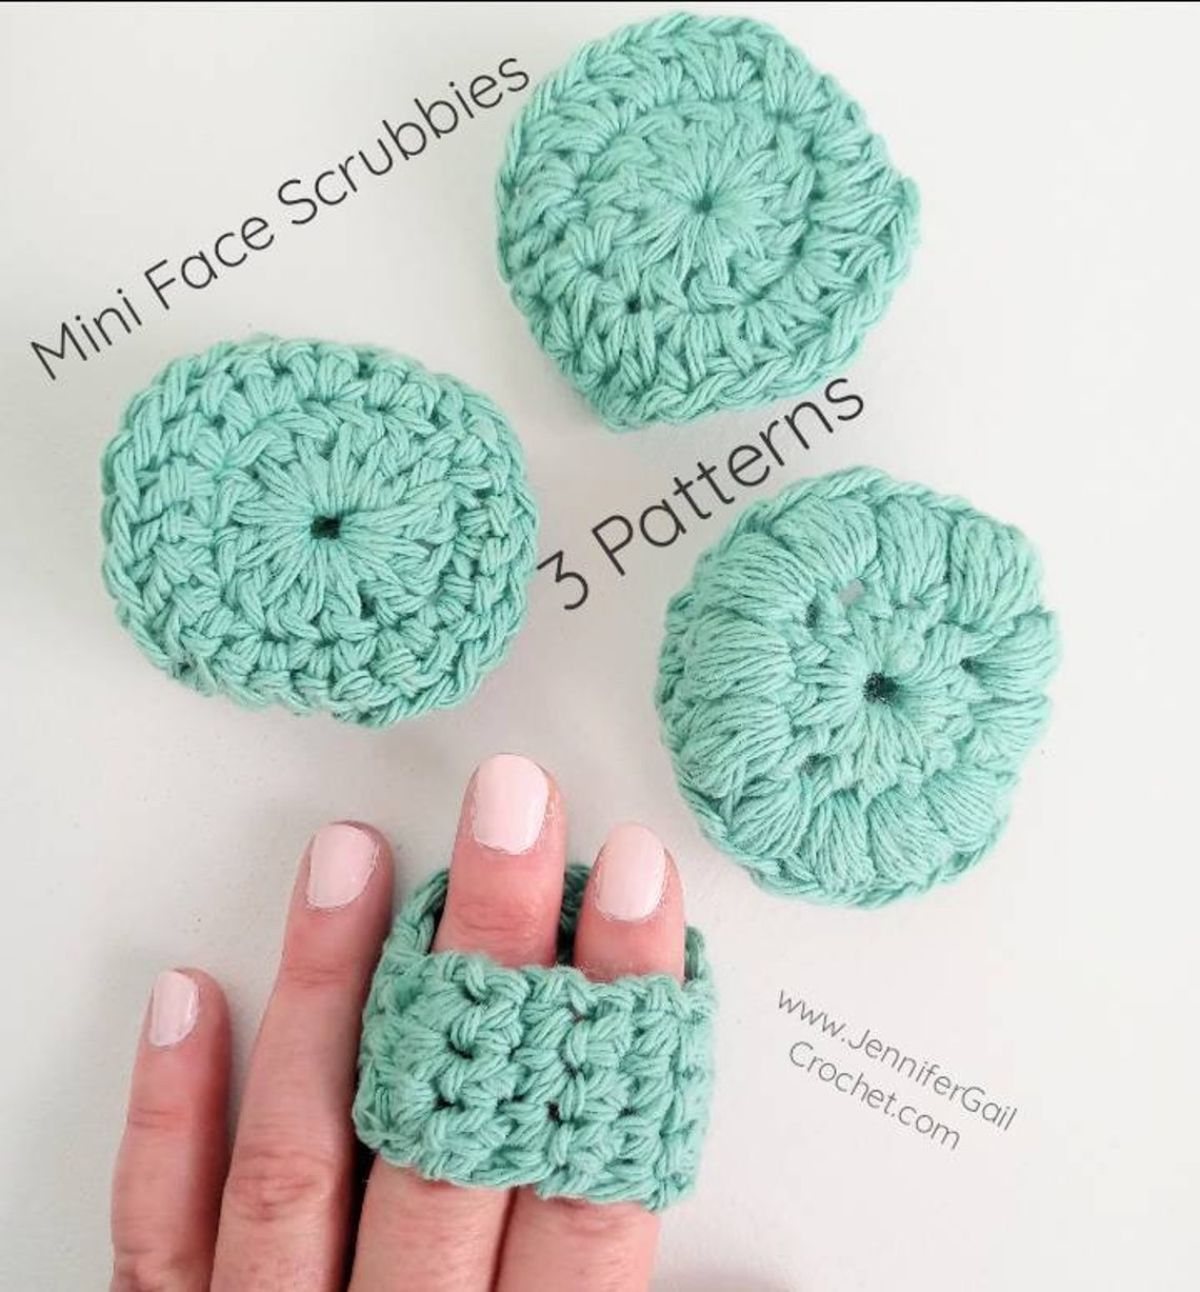 Three round mini crochet face scrubbies next to a manicured hand with the back of a scrubbie stretched over two fingers.